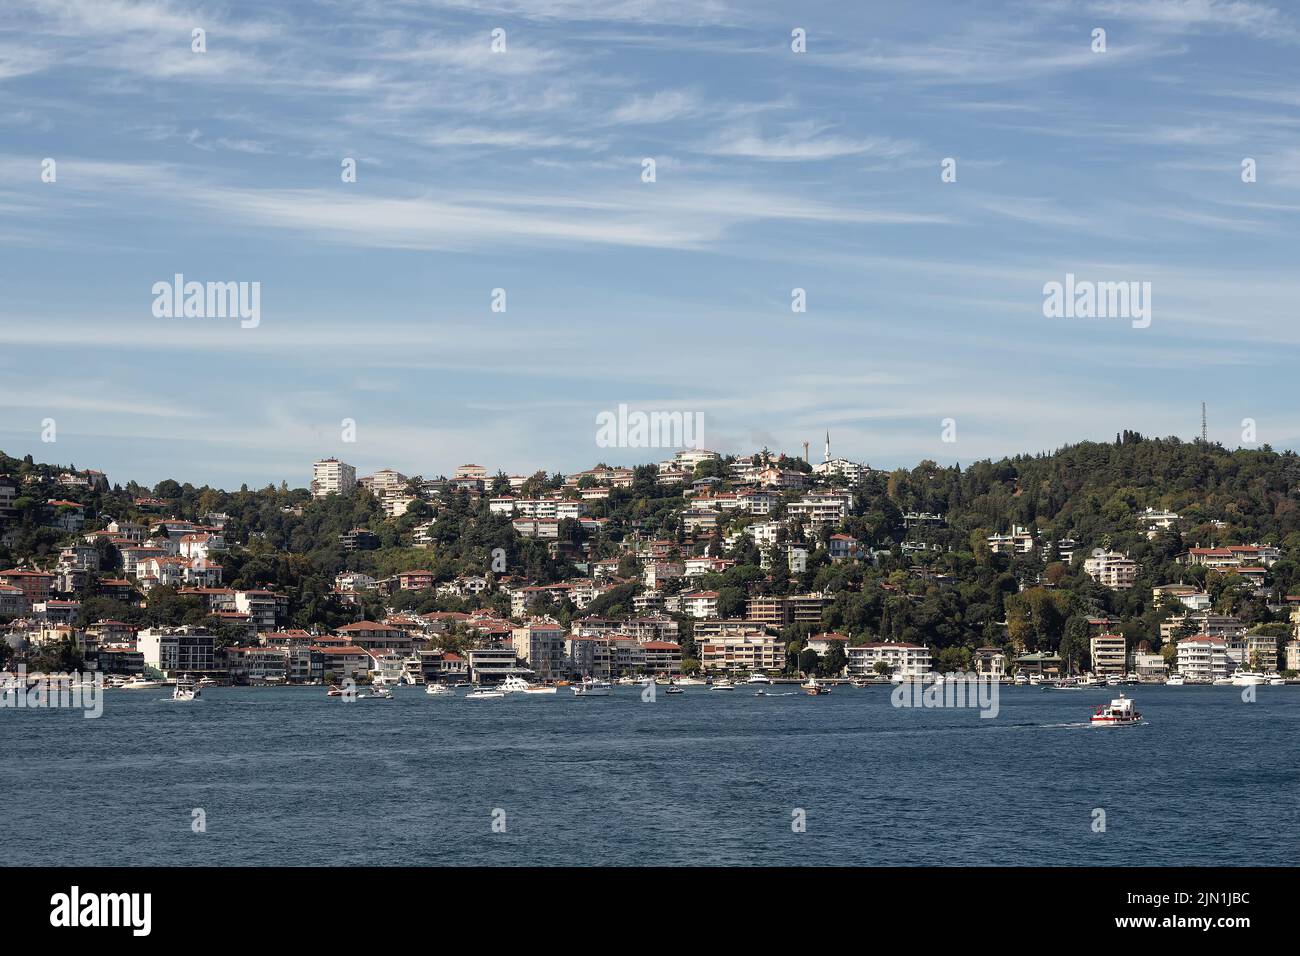 View of yachts and cruise tour boats on Bosphorus and Bebek neighborhood on European side of Istanbul. It is a sunny summer day. Beautiful travel scen Stock Photo